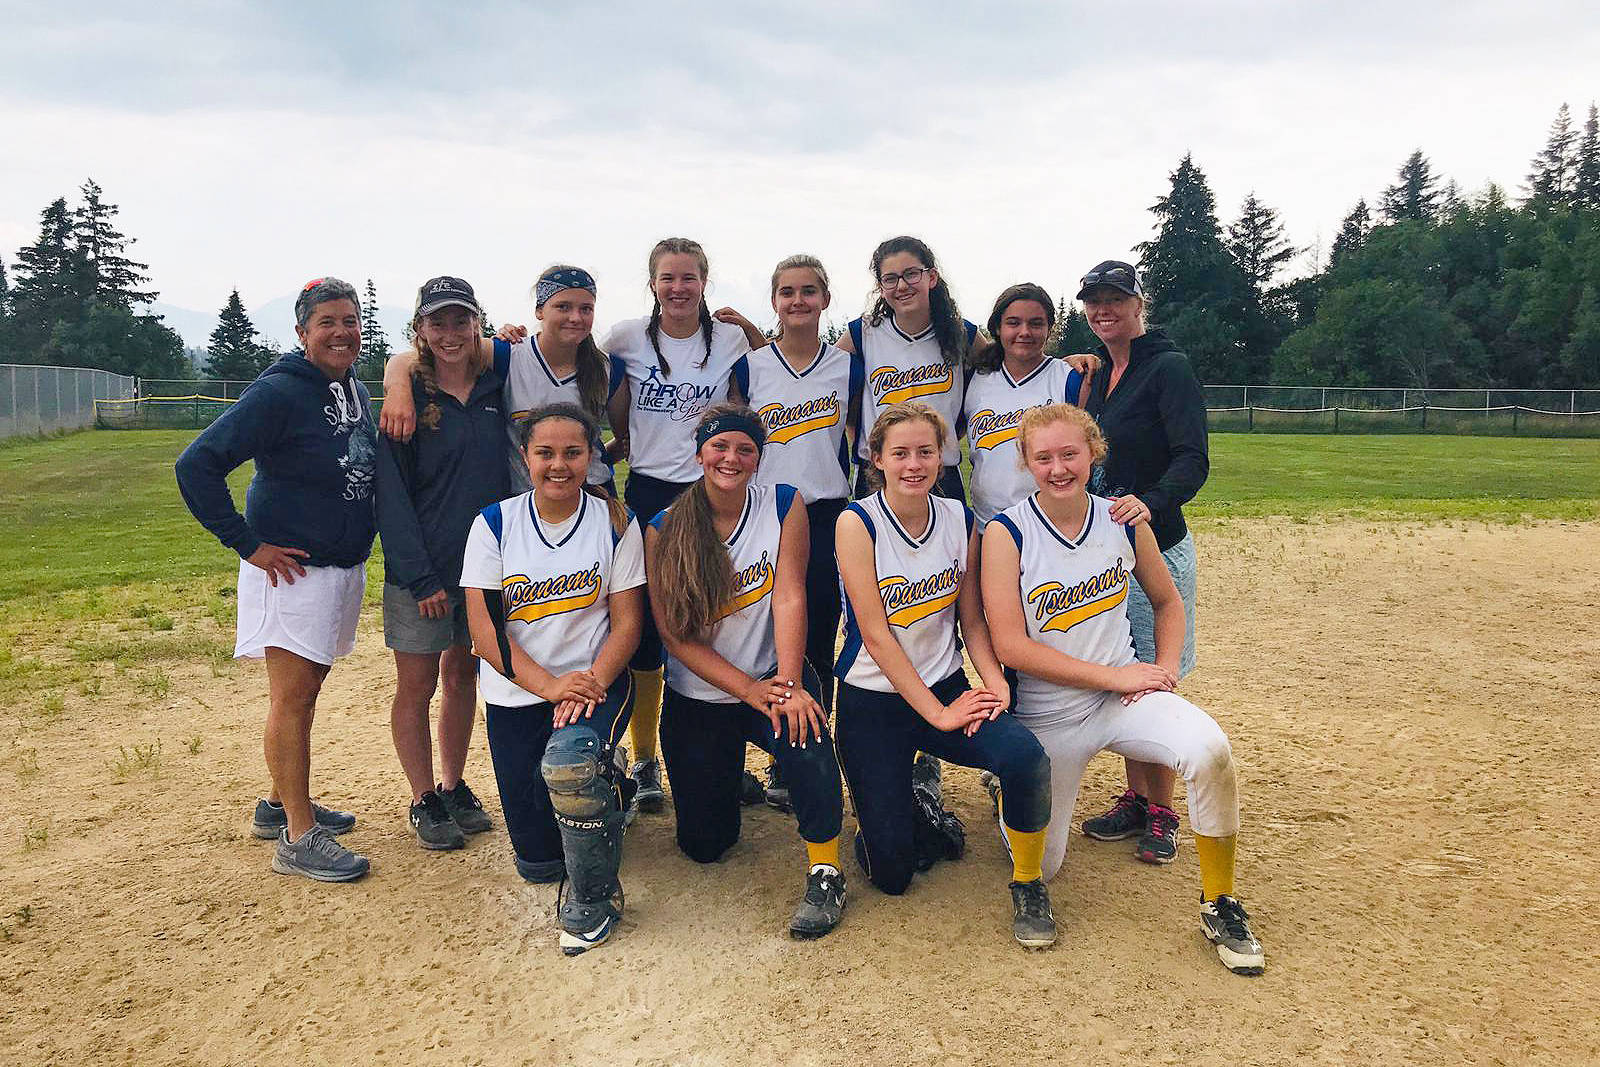 Members of the Tsunami youth softball team pose for a photo on Sunday, Aug. 21, 2019 after a round robin tournament last weekend at Jack Gist Park in Homer, Alaska. (Photo by Monica Anderson)